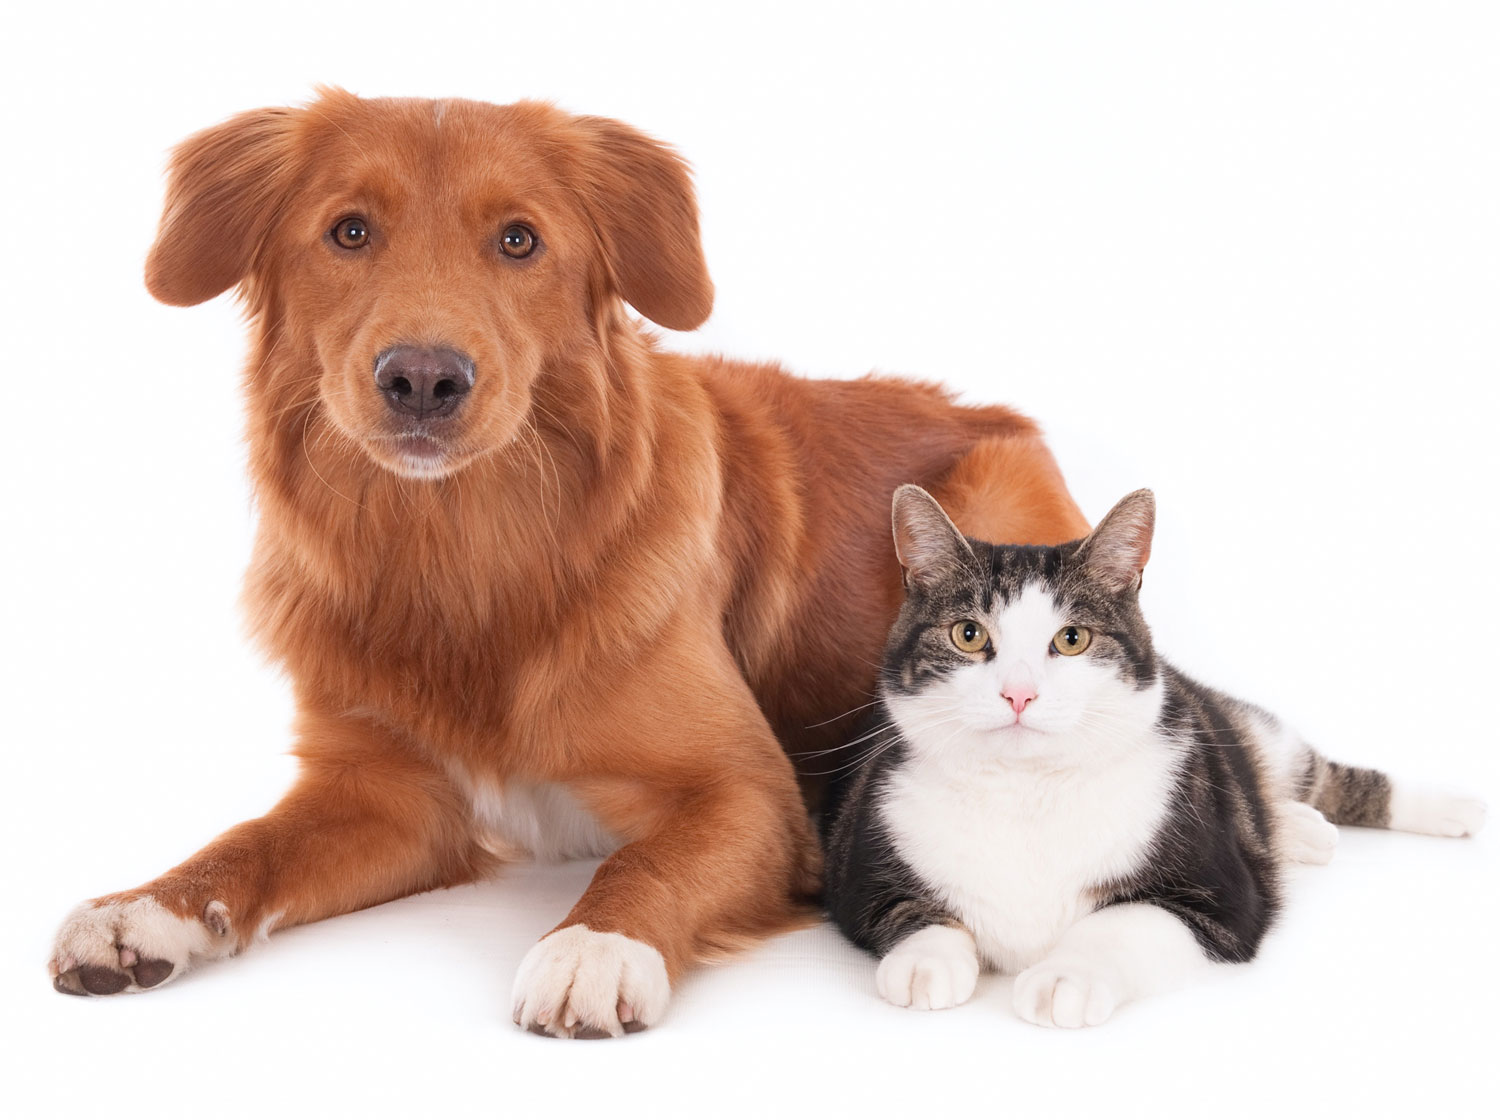 retriever and cat sitting side by side